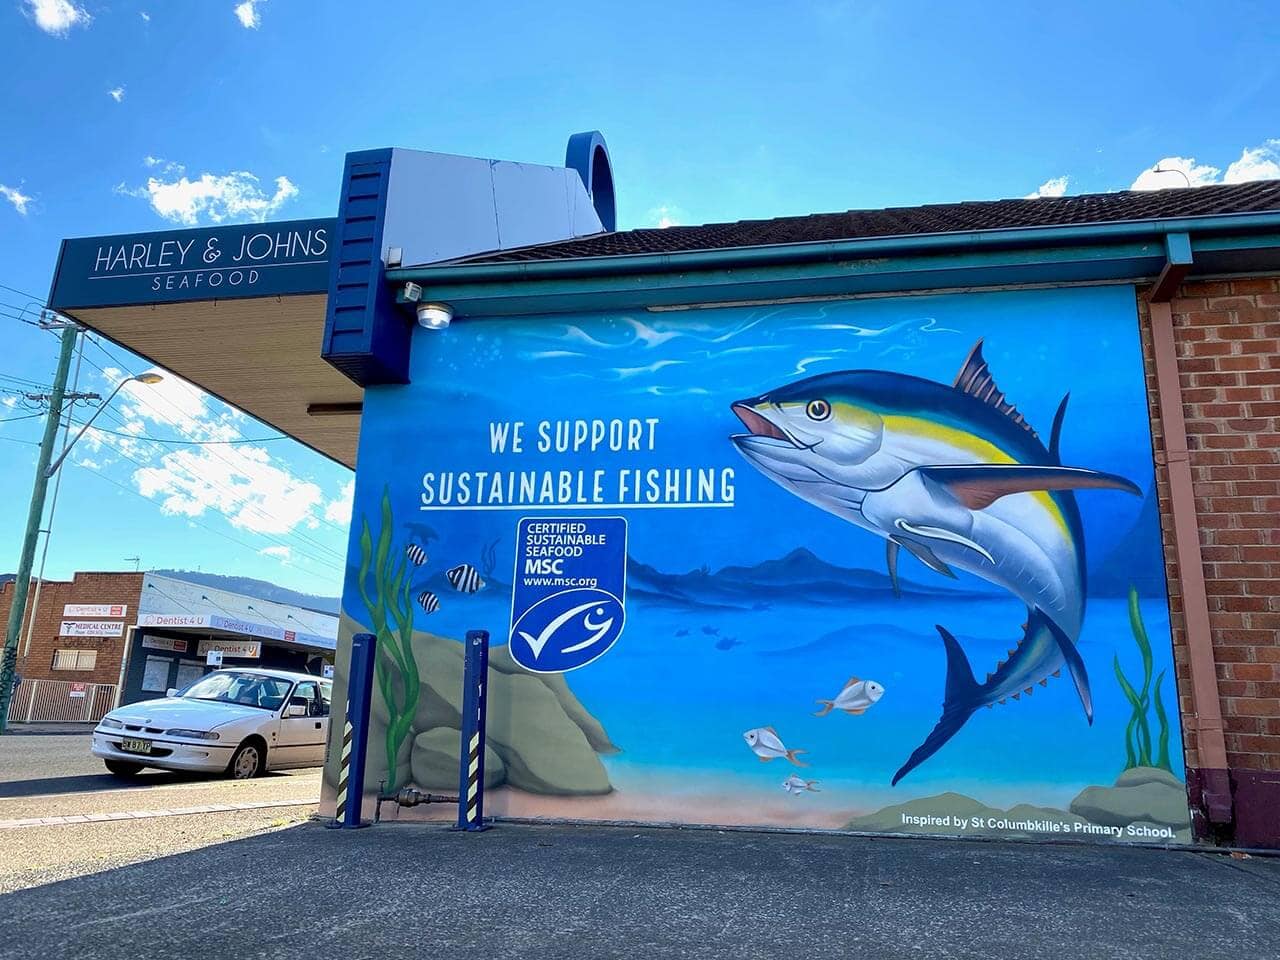 Harley and Johns Seafood mural. Photo by MSC.